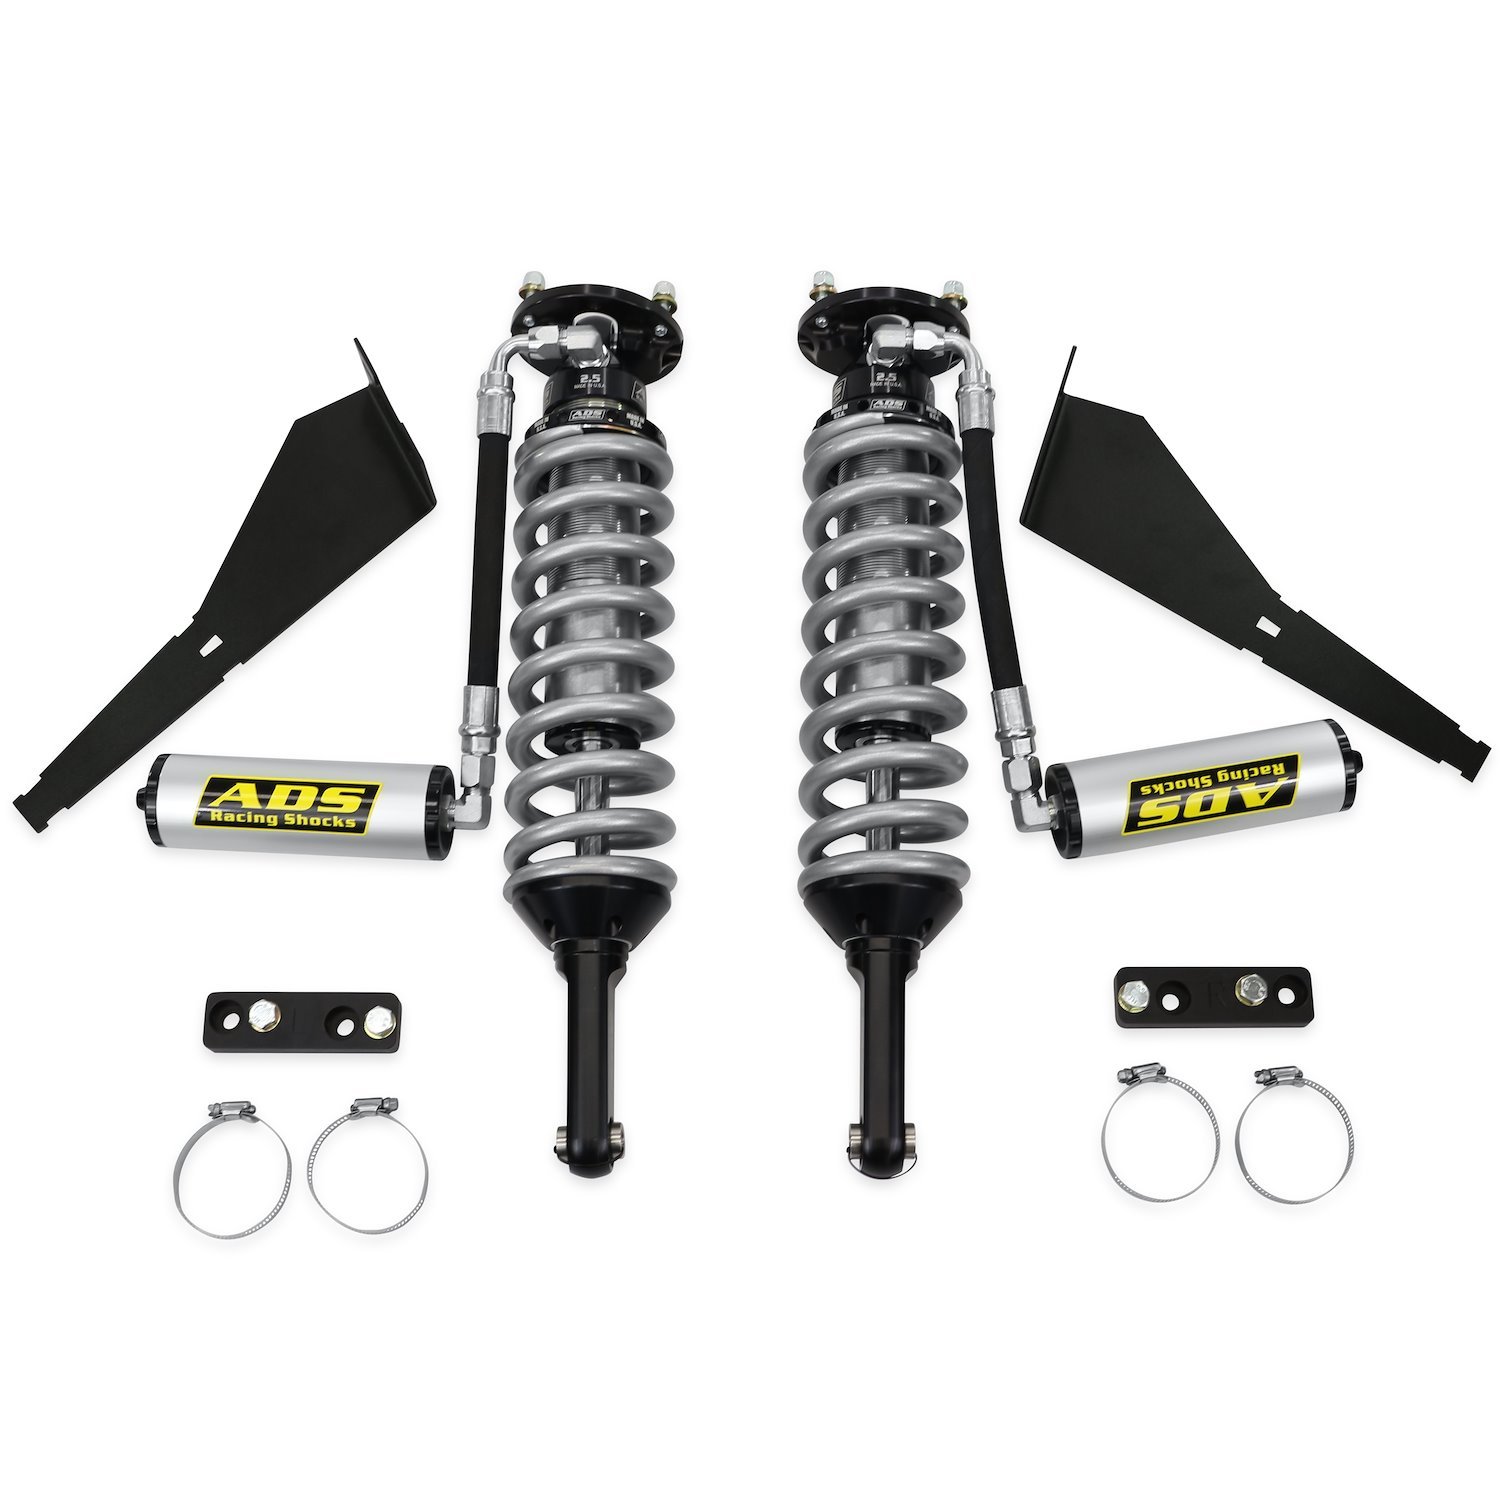 250-ZR20F-A70 Racing Bolt-On Shocks, Fits Select Chevy Colorado/GMC Canyon ZR2, 2.5 in., w/ Remote Reservoir, 0-2 in. Lift